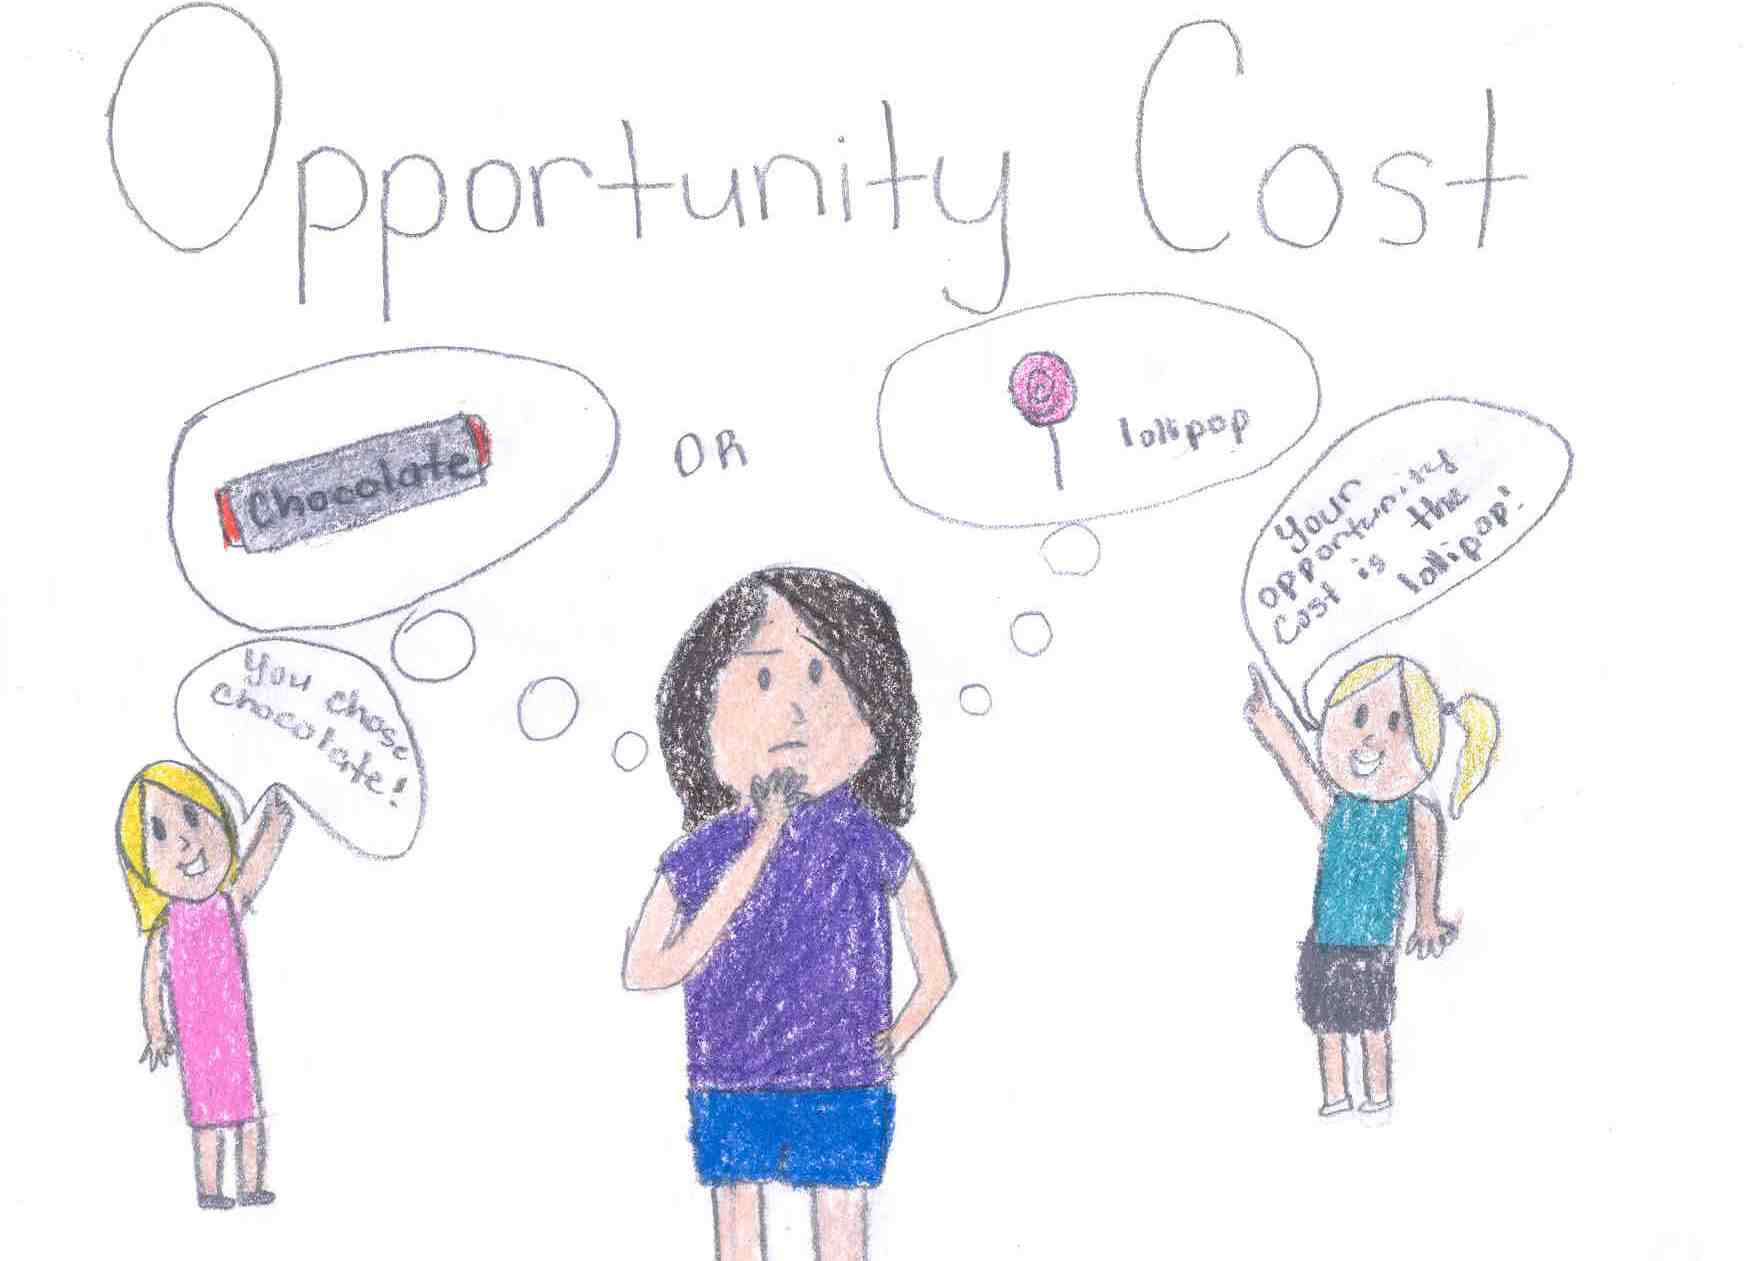 OpportunityCost1